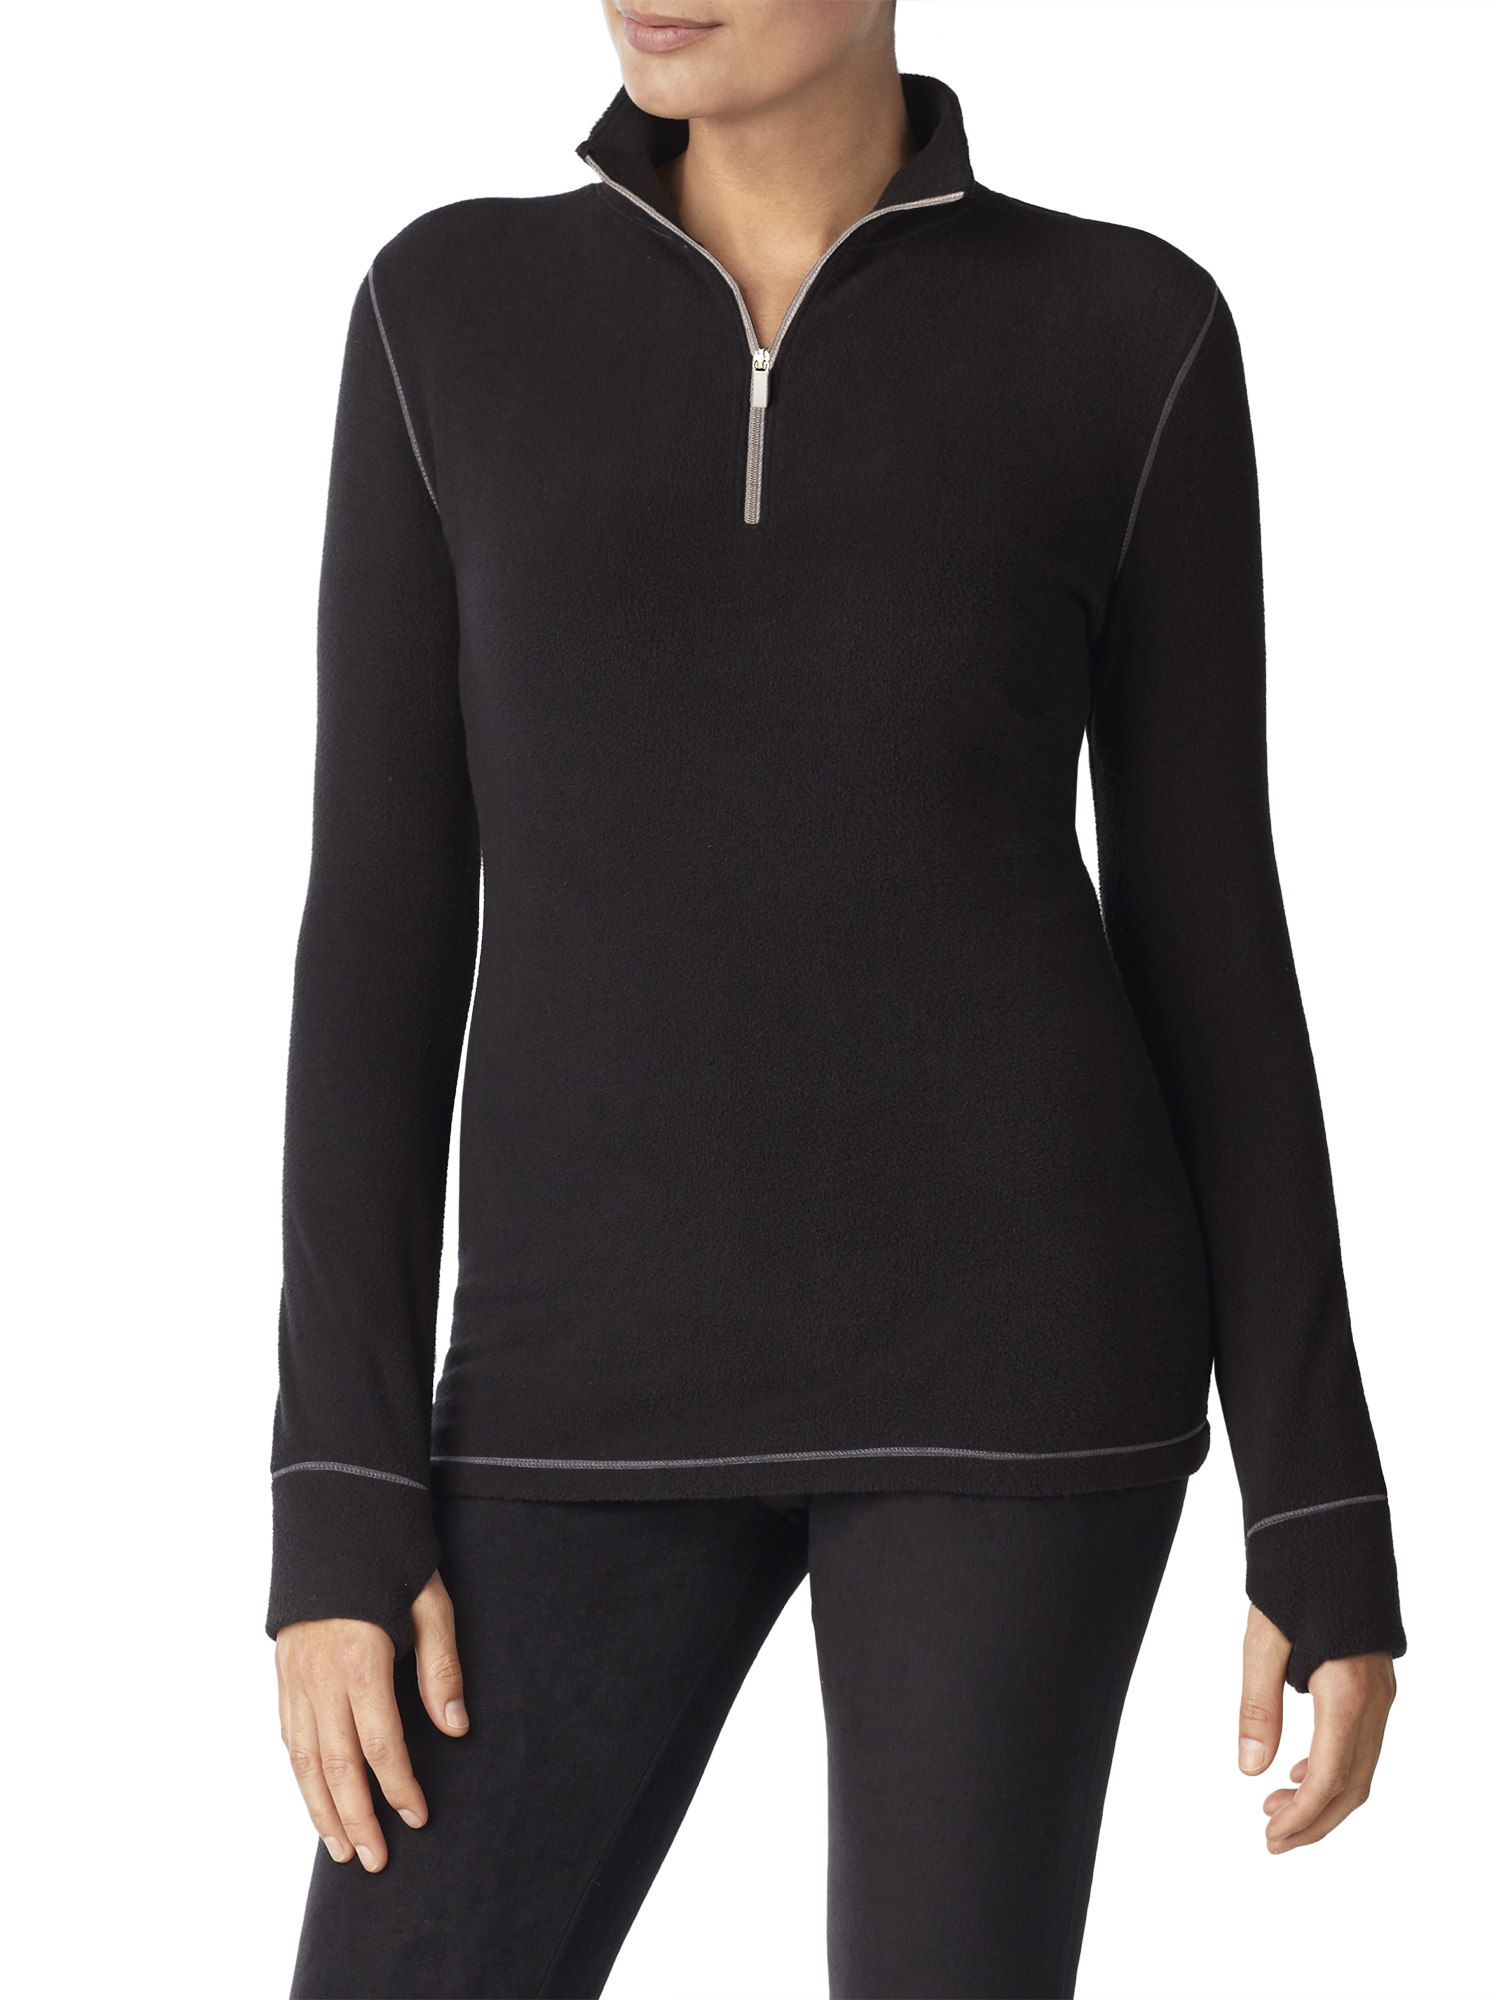 ClimateRight by Cuddl Duds Women's Stretch Fleece Base Layer Half Zip Thermal Top - image 1 of 4